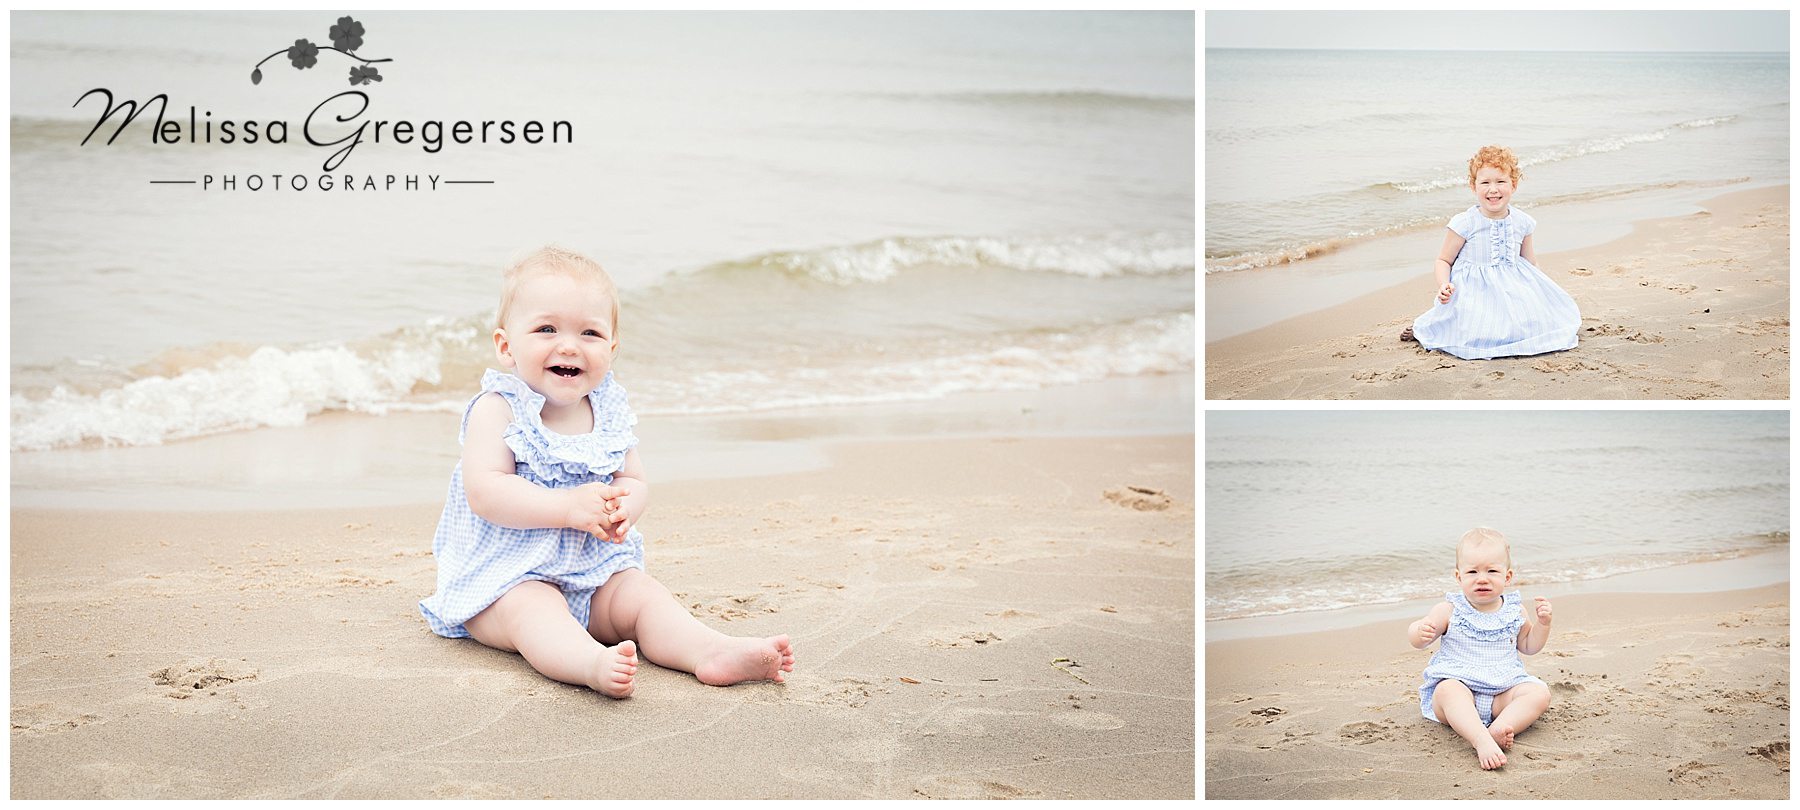 Huiskamp Family :: South Haven Family Photography Gregersen Photography